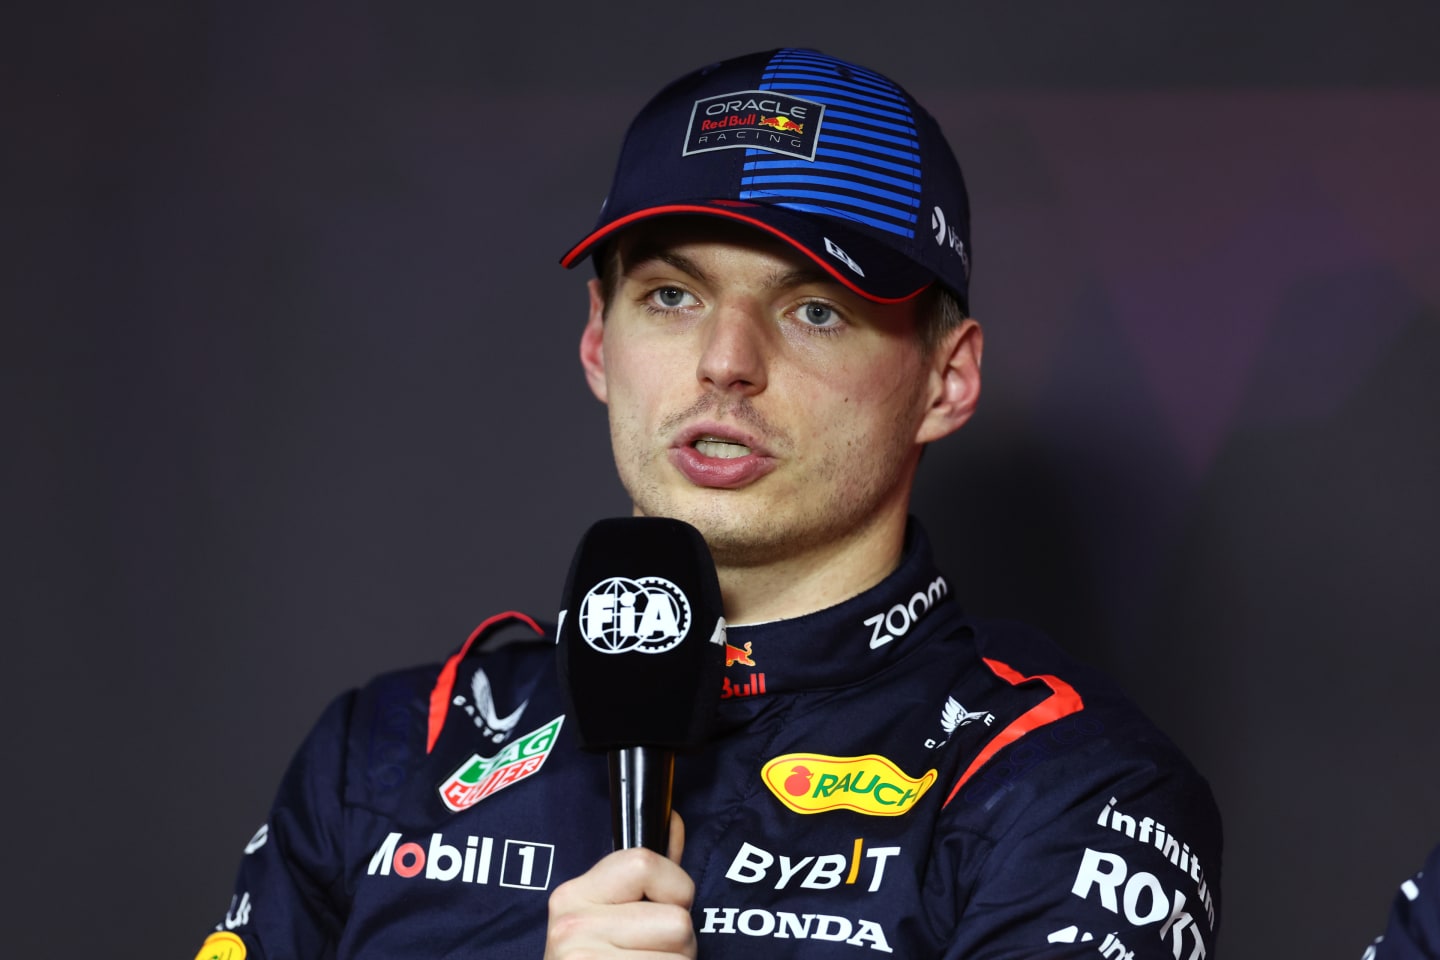 JEDDAH, SAUDI ARABIA - MARCH 08: Pole position qualifier, Max Verstappen of the Netherlands and Oracle Red Bull Racing talks in a press conference after qualifying ahead of the F1 Grand Prix of Saudi Arabia at Jeddah Corniche Circuit on March 08, 2024 in Jeddah, Saudi Arabia. (Photo by Bryn Lennon/Getty Images)